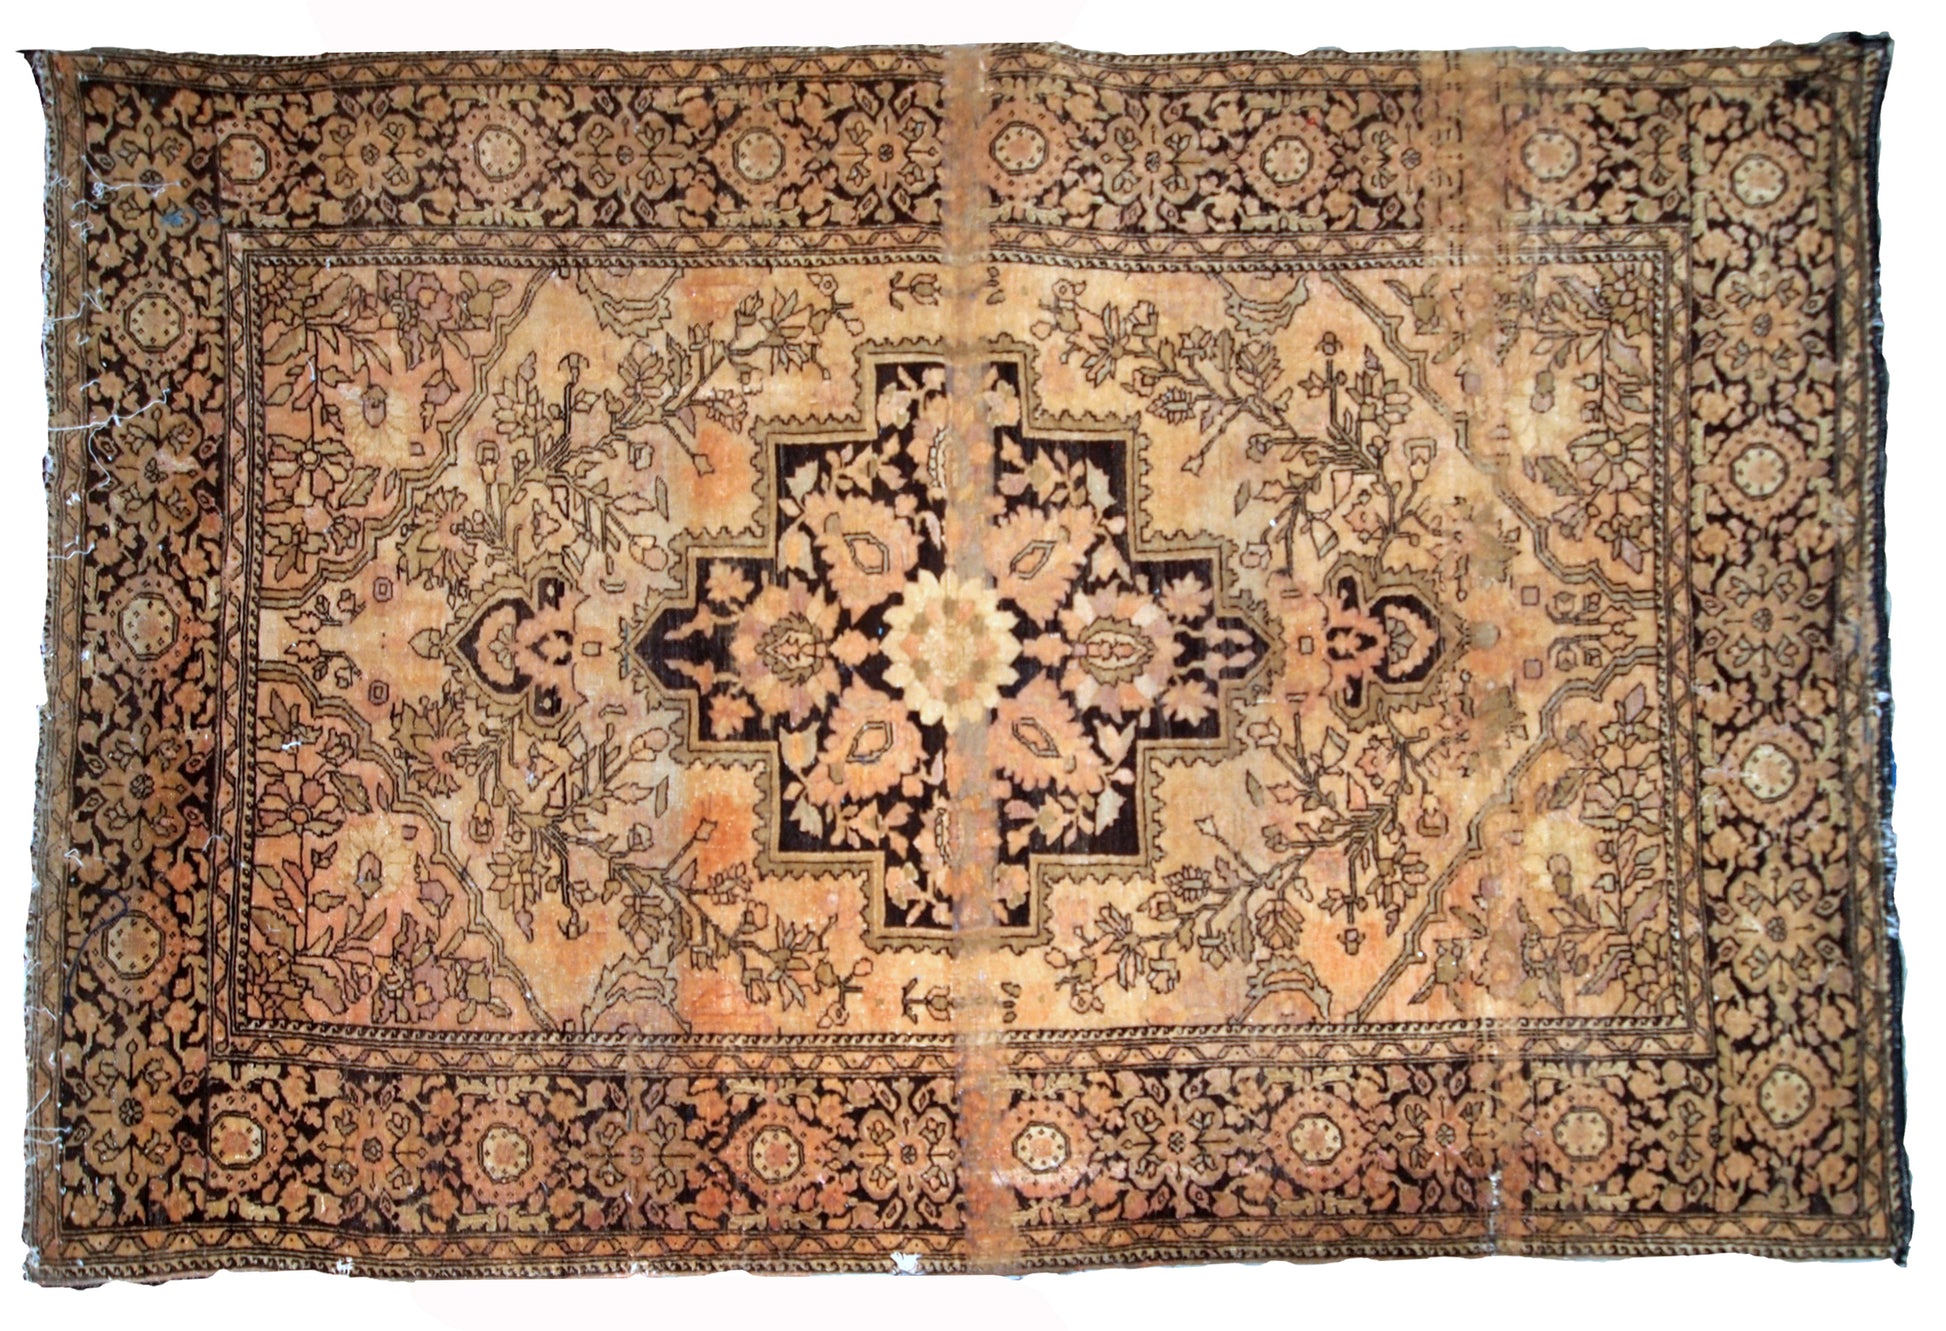 Handmade antique Sarouk Farahan rug in light shades. The rug is from the end of 19th century in original condition, has some low pile.